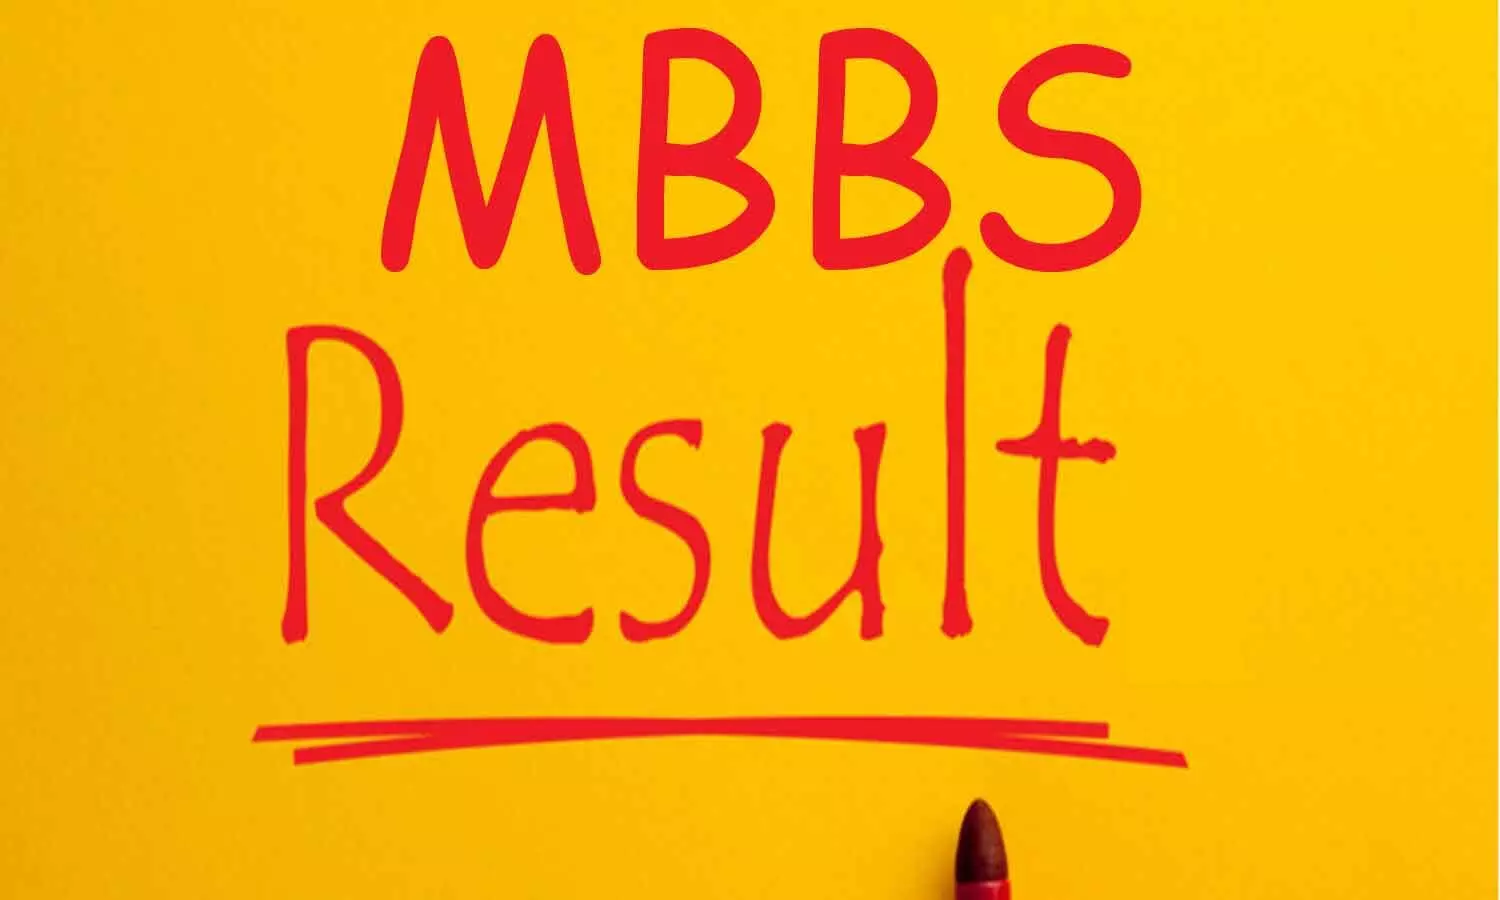 Publish MBBS, BDS Results before March 31: Odisha Govt tells State Varsities